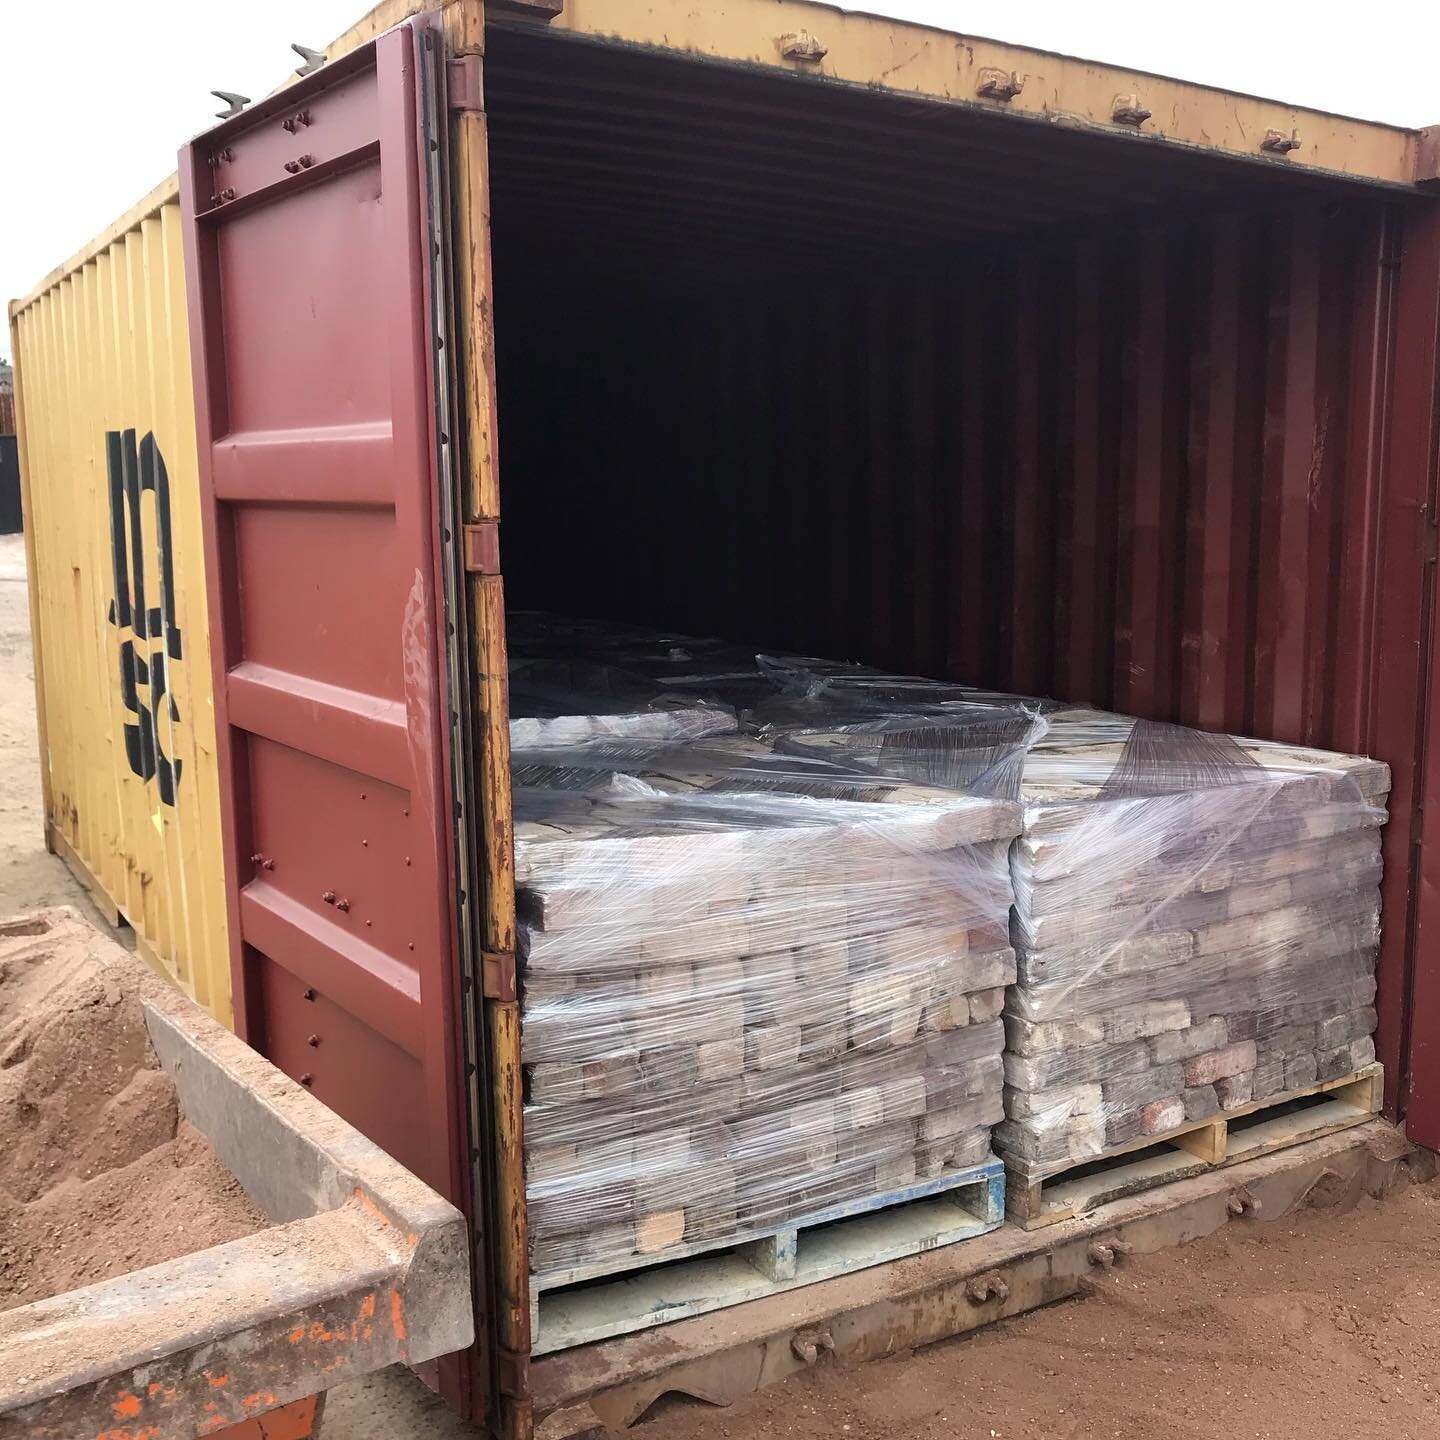 Ready for export&hellip; #Recycledbuildingcentre #cheapasbricks #recycledbricks #recycledbrick #pavinggrade #featurewall #architecture #architectureaustralia